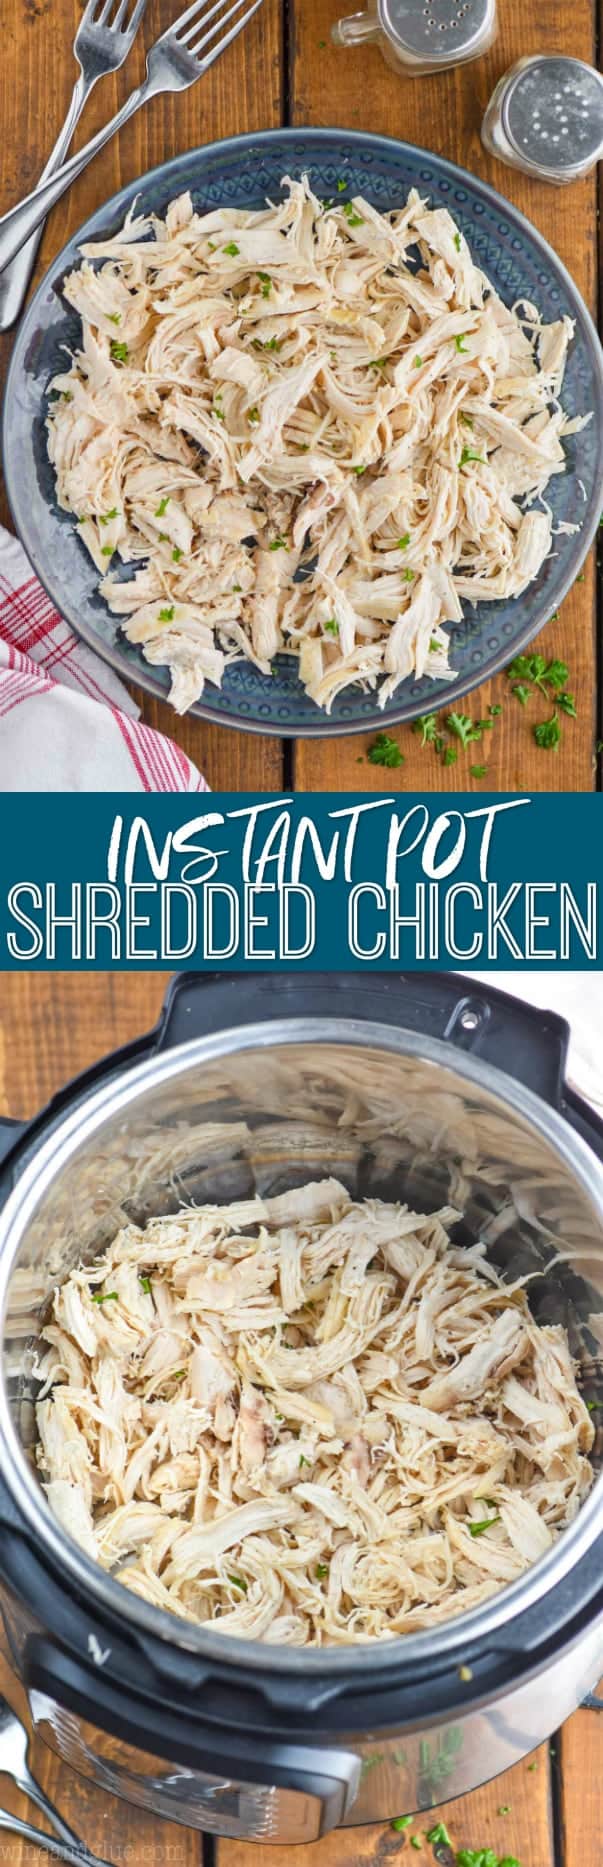 collage of pictures of instant pot shredded chicken recipe